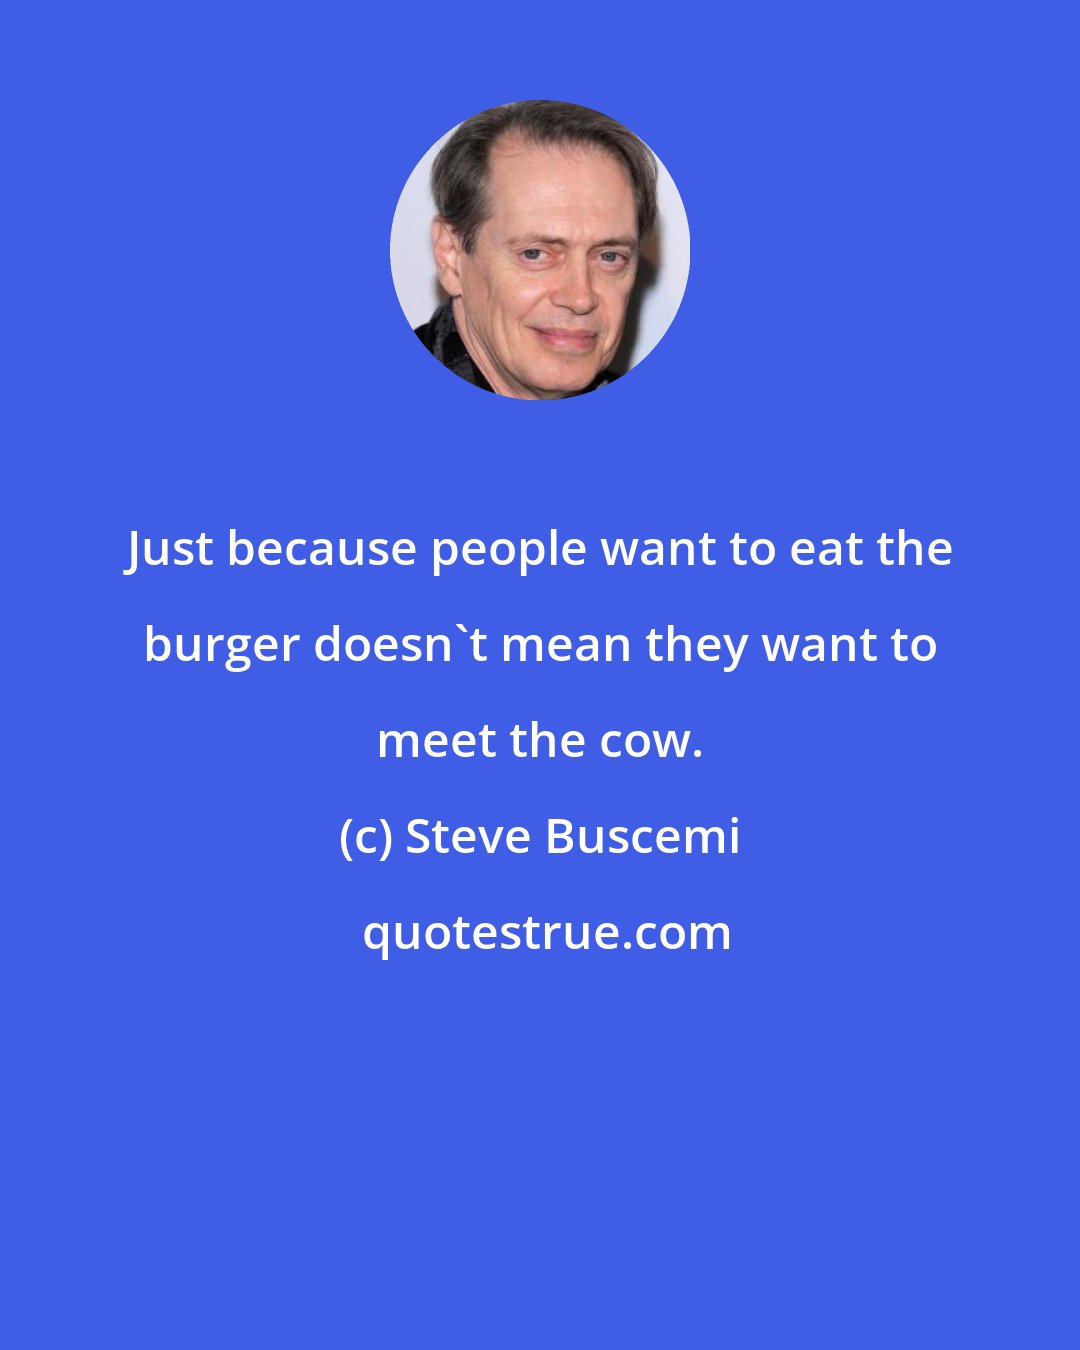 Steve Buscemi: Just because people want to eat the burger doesn't mean they want to meet the cow.